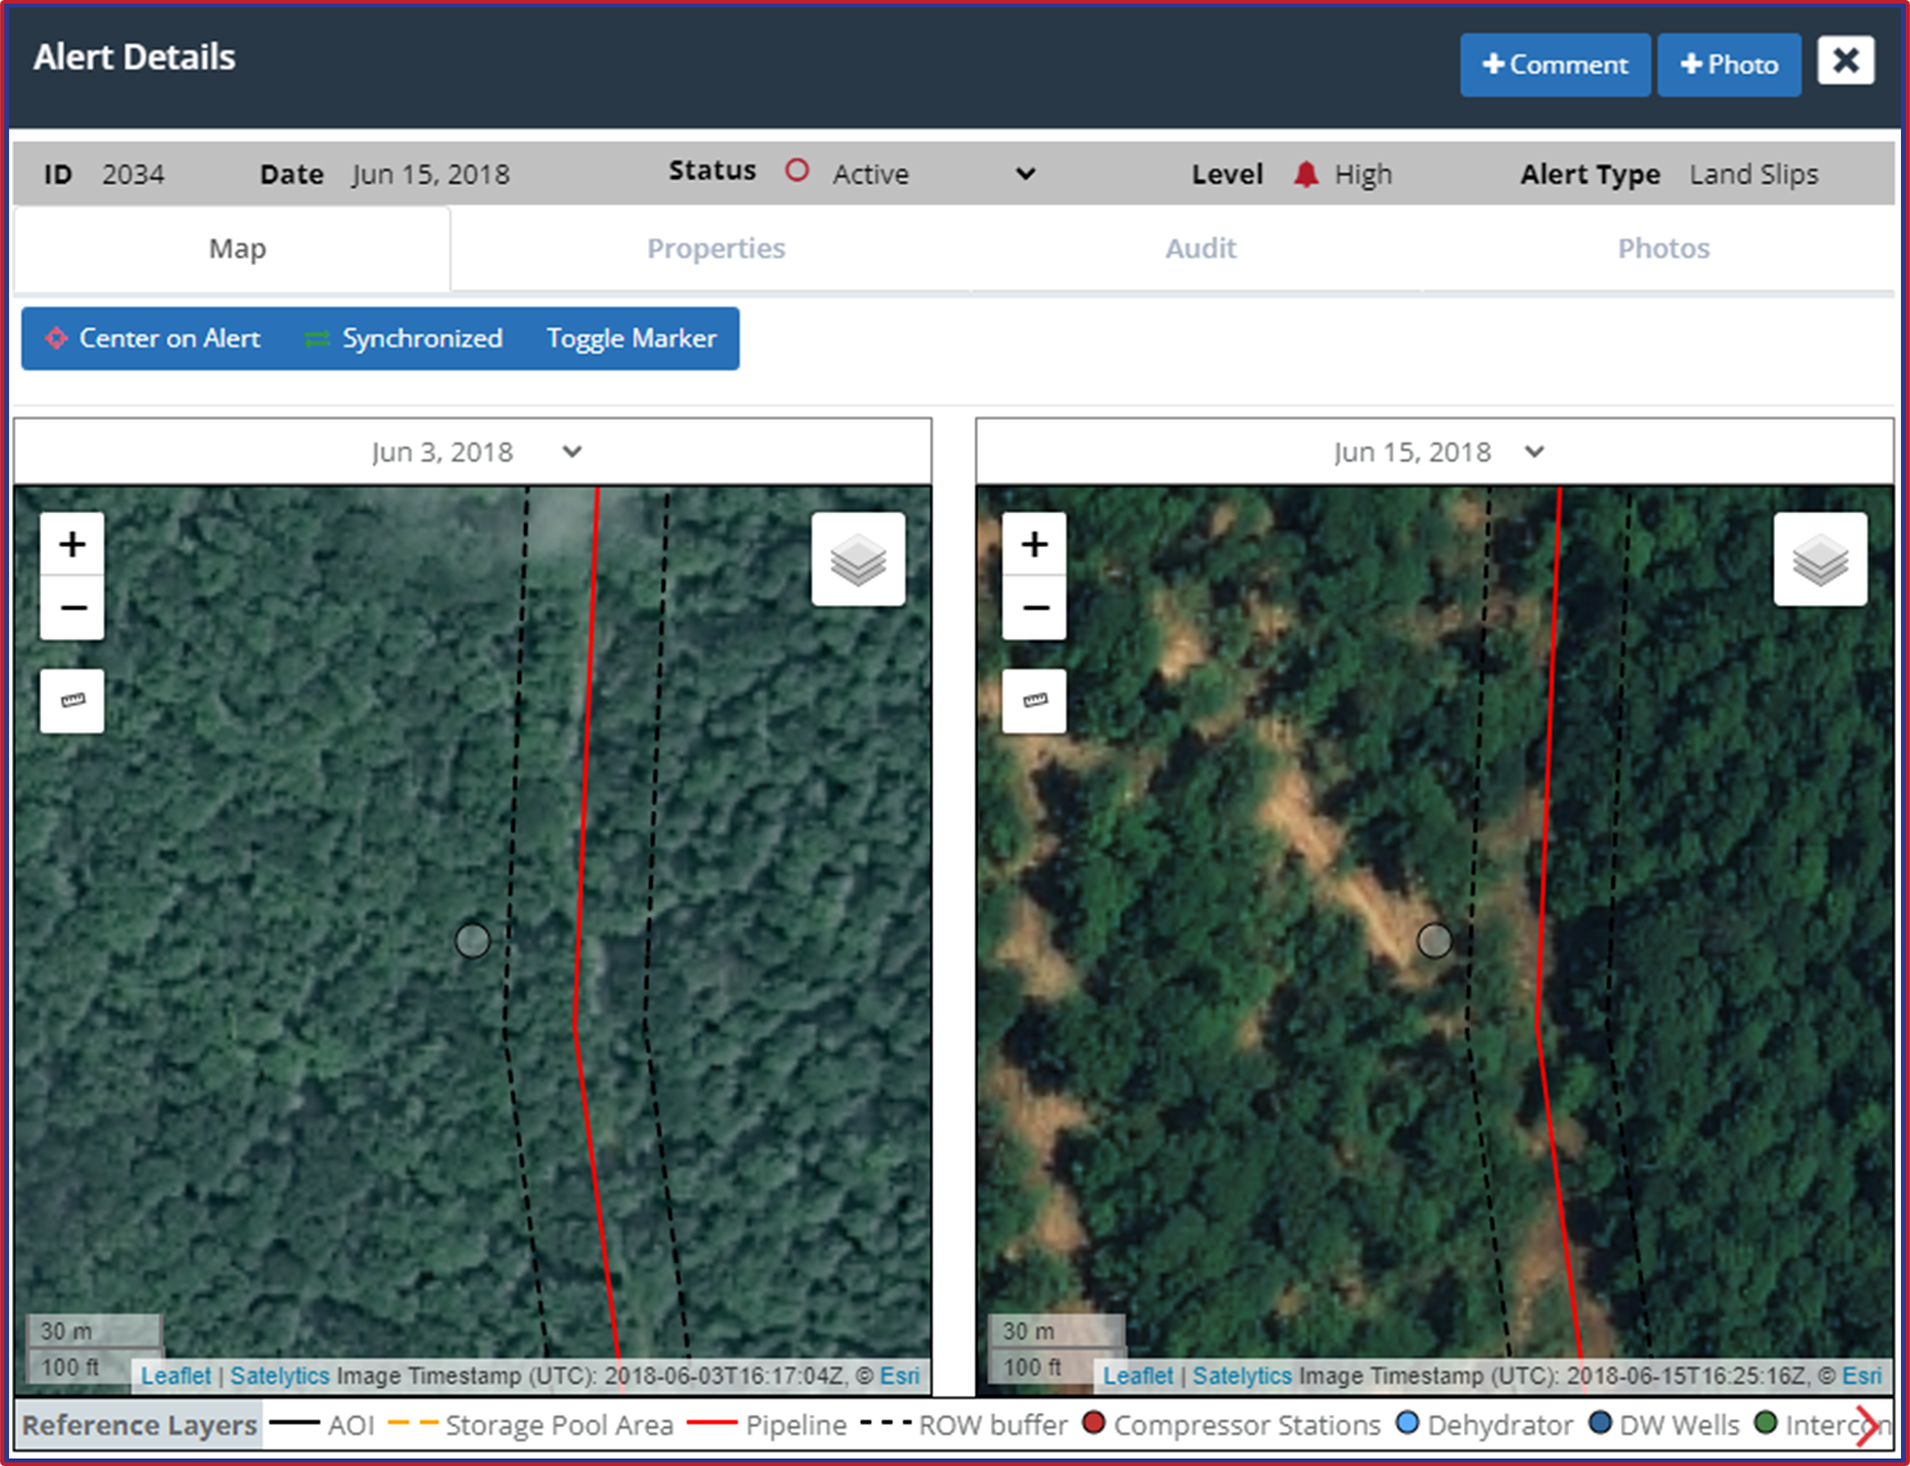 Compare surveys to identify exposed soil and loss of vegetation, as well as land slips.